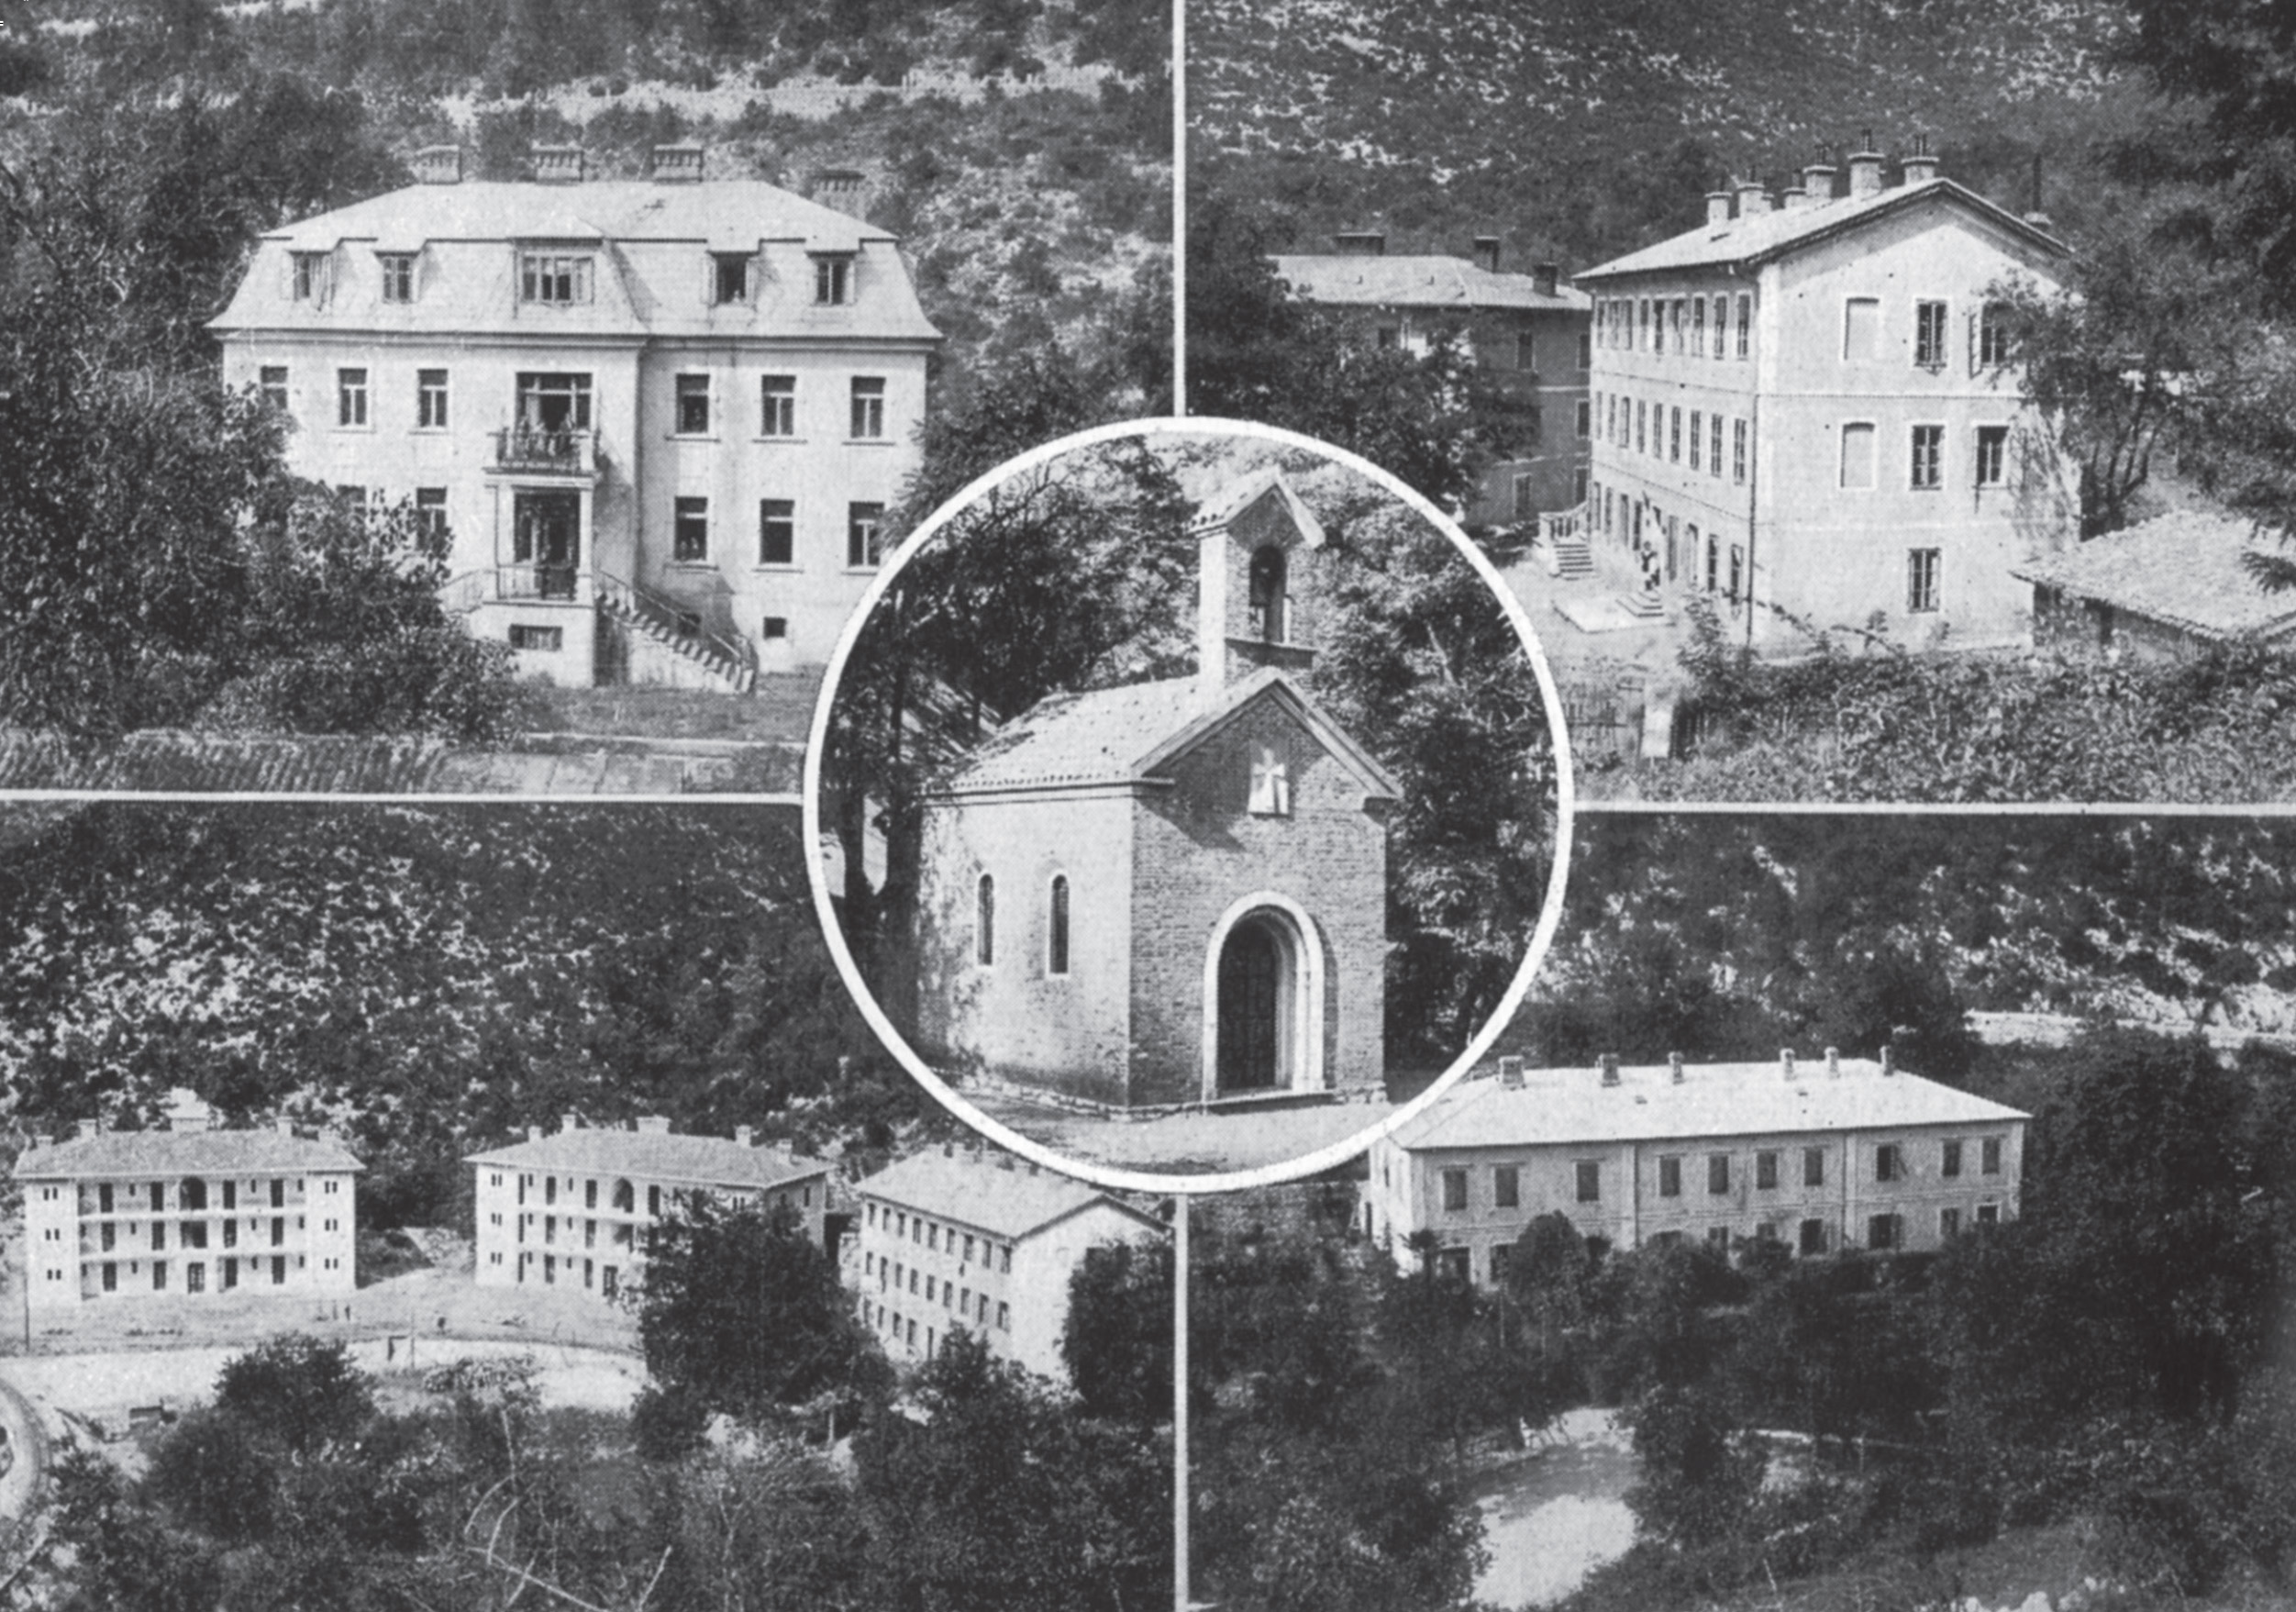 Re-Reading the Story of Arsia/Raša: from the New Town of the 1930s to the (Post)Socialist Present